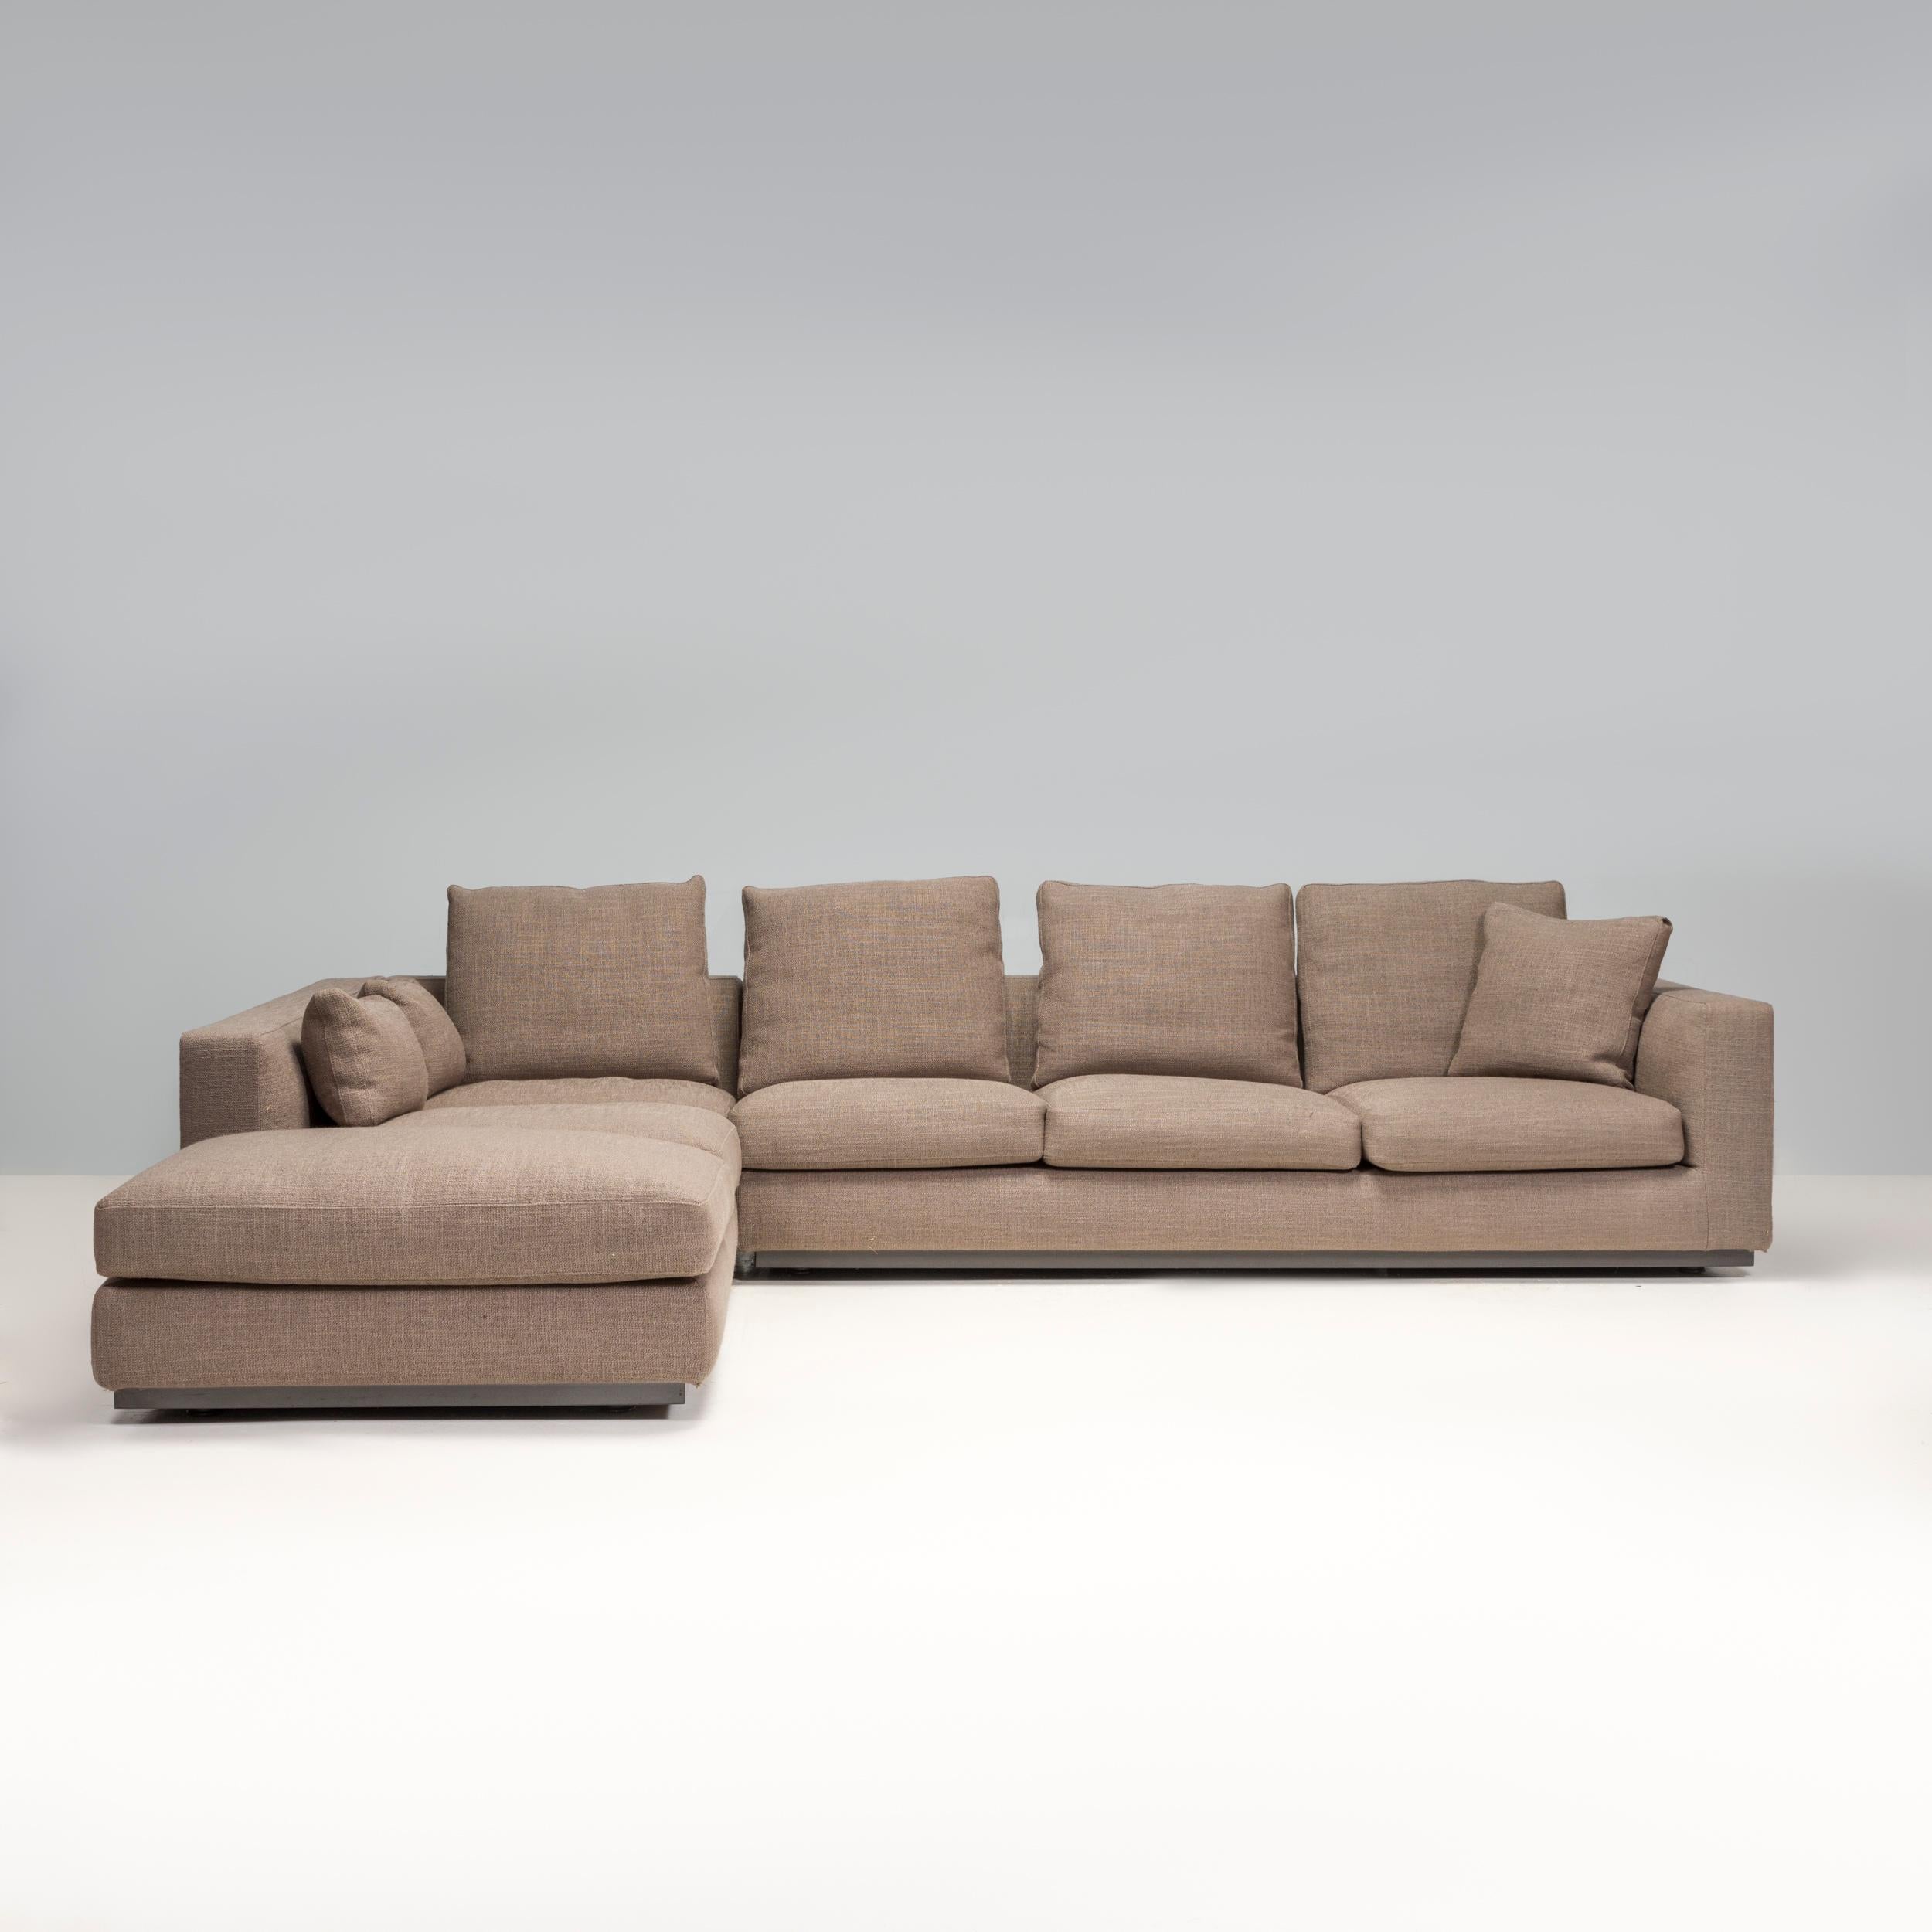 Designed by Rodolfo Dordoni for Minotti, the Andersen Line sofa formed part of the 2010 Senza Tempo Collection and embodies timeless Italian design.

Fully upholstered in grey fabric, the sofa has a modern linear silhouette sitting on a metal base